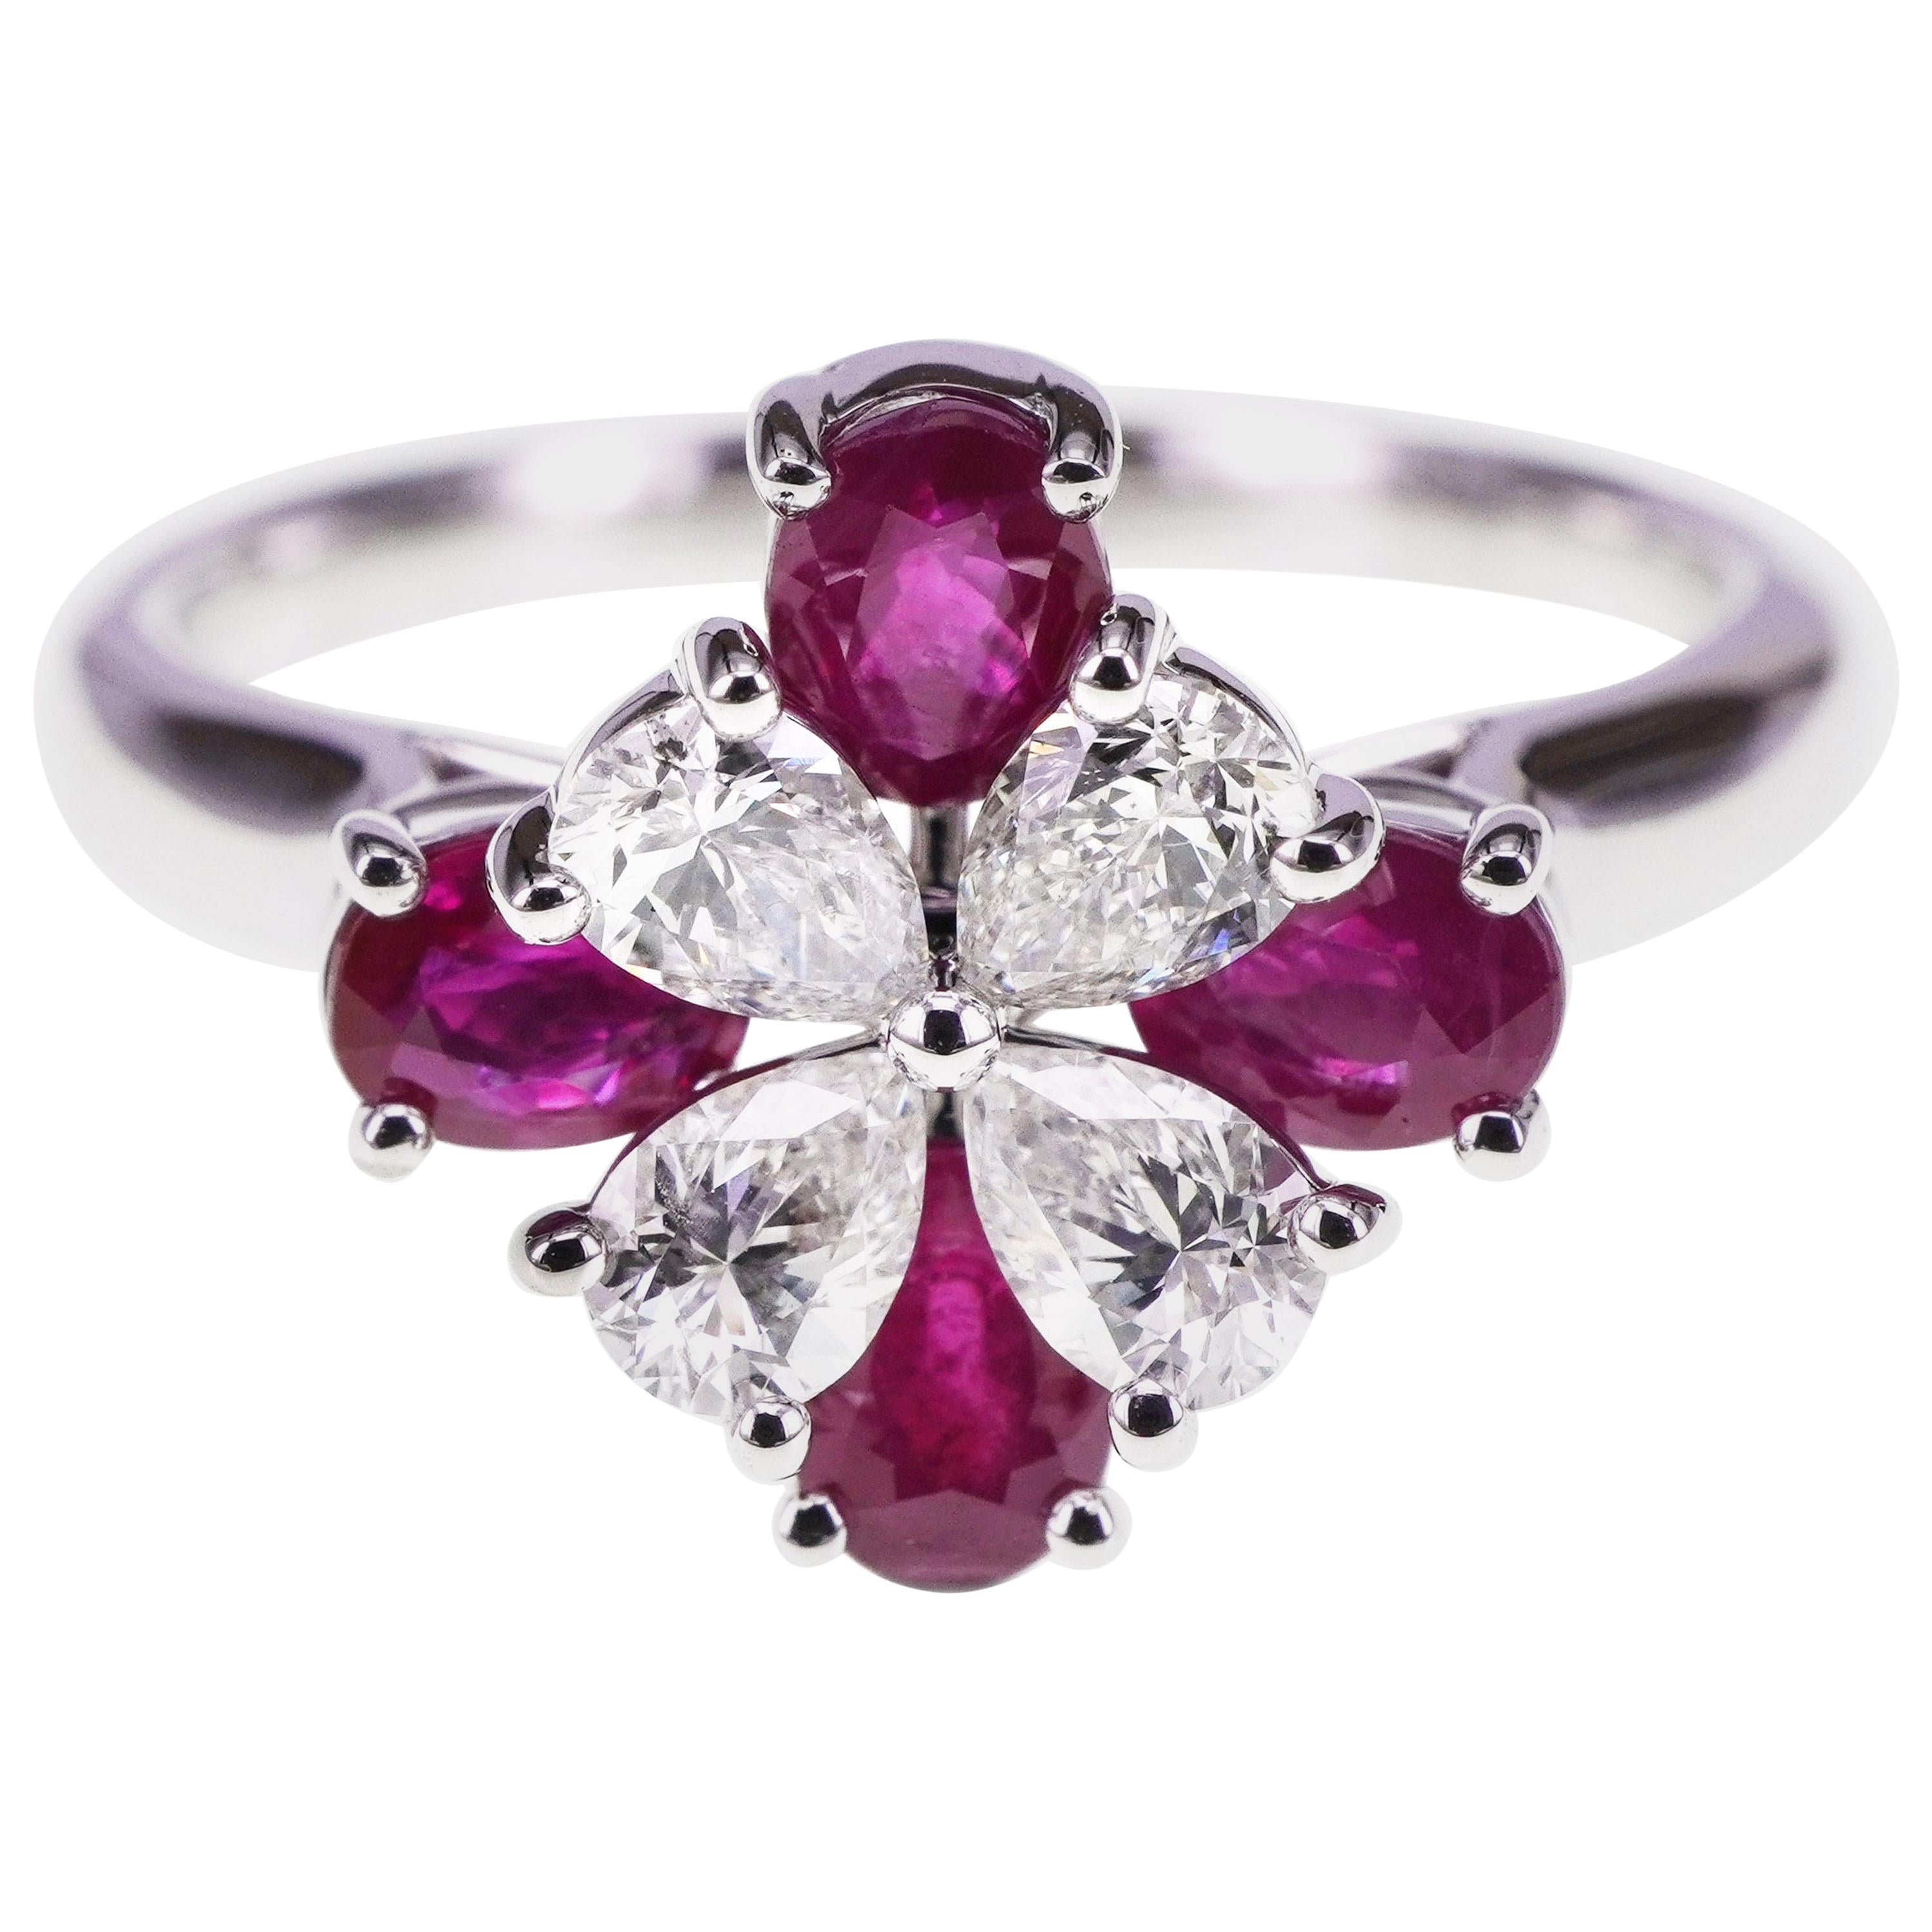 Classical 1.02 Carat Ruby and Diamond Pretty Ring